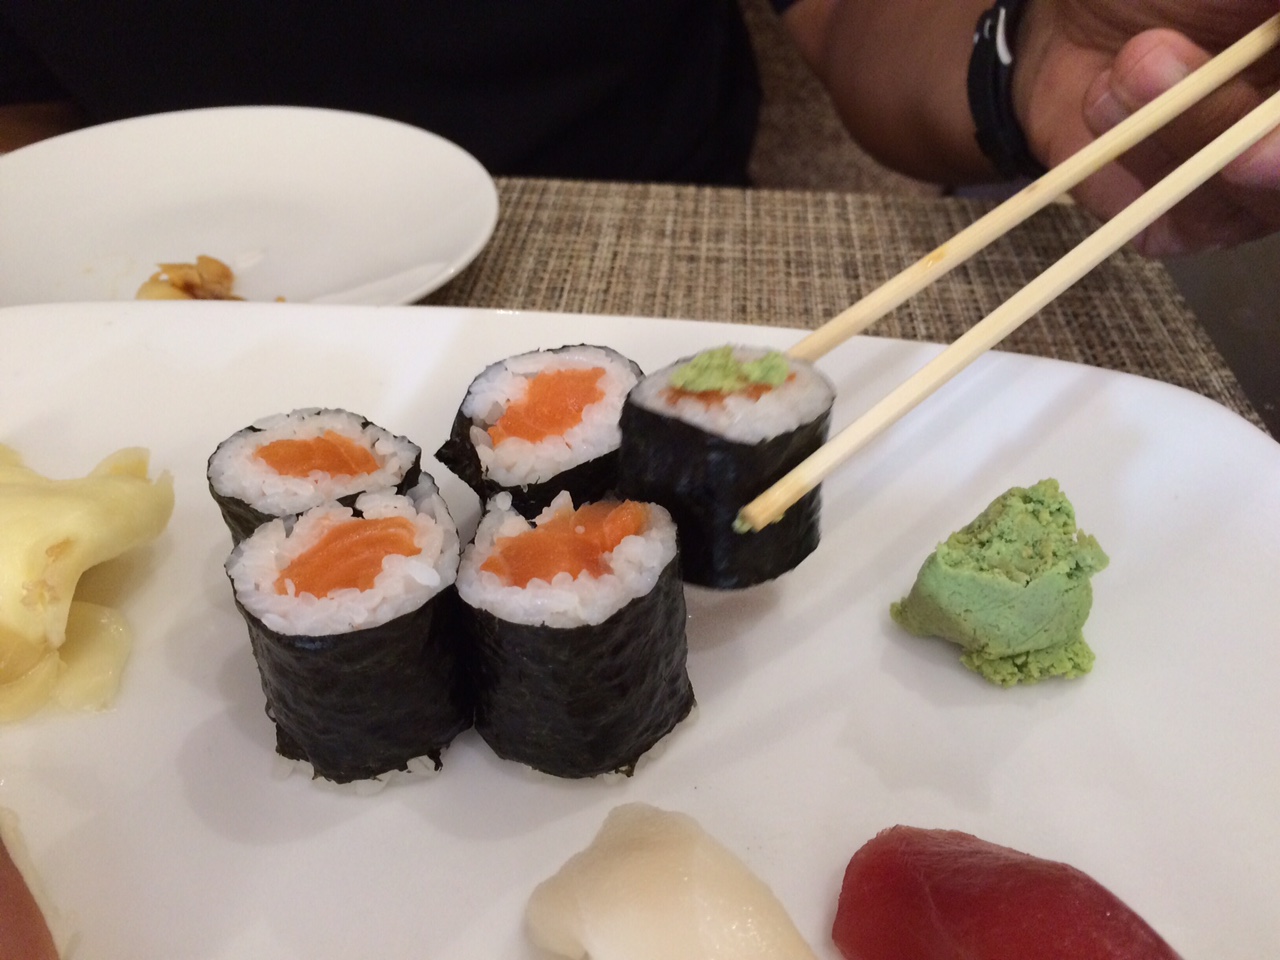 The wasabi should be added separately from the soy sauce. A dab on top is all you need. (WTOP/Rachel Nania)